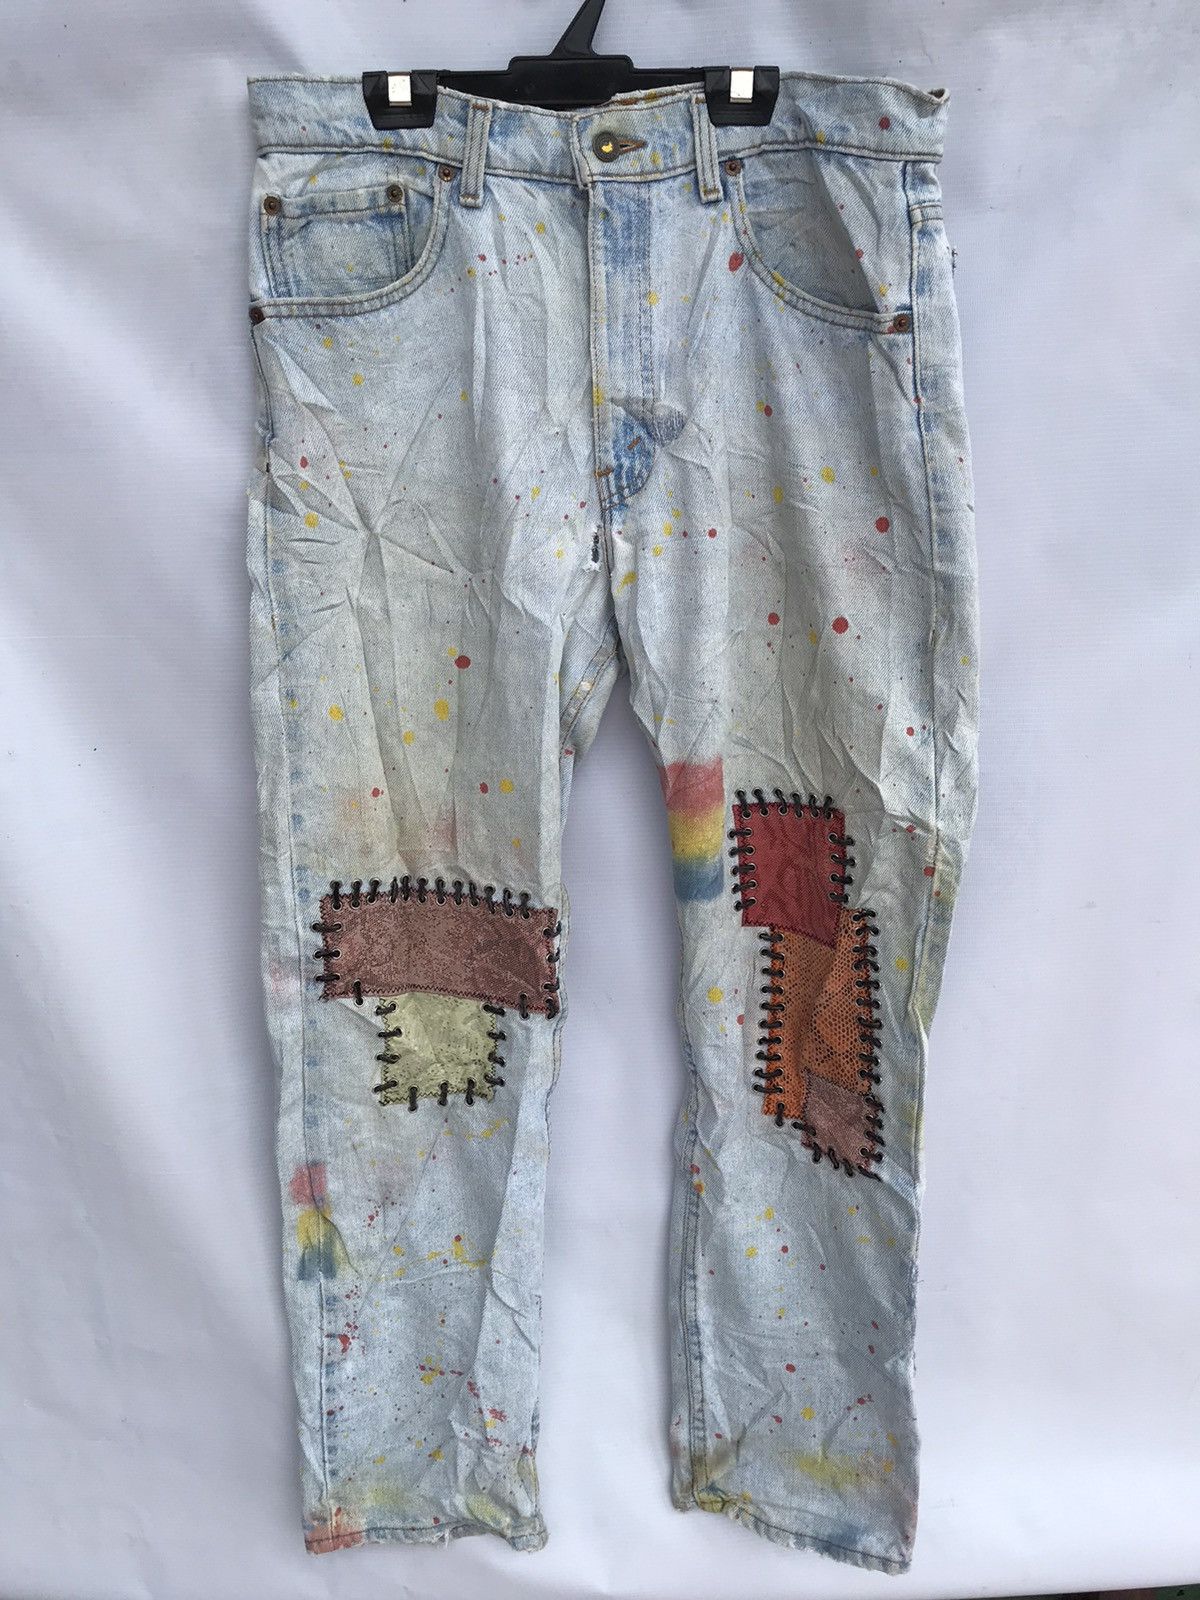 Hysteric Glamour VINTAGE LEVIS DISTRESSED ART DESIGN Size US 33 - 2 Preview